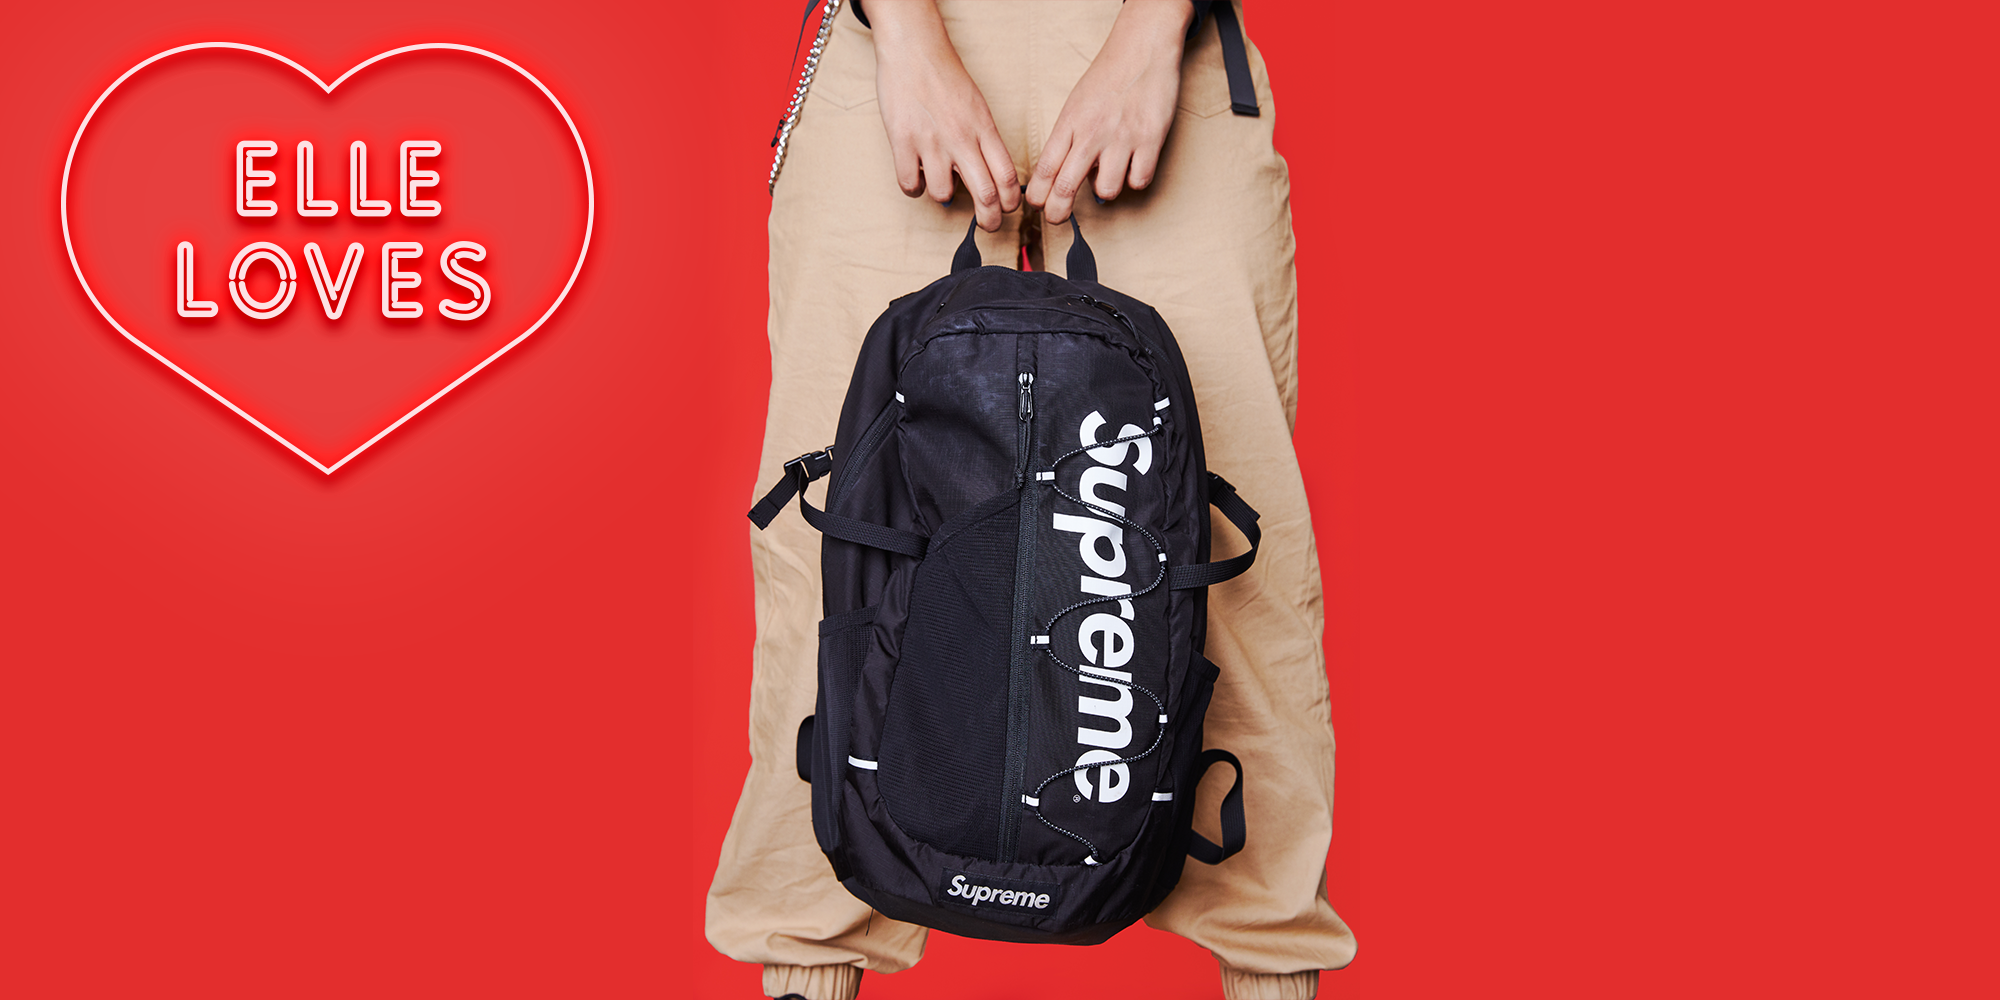 Every Supreme Backpack on Sale, 56% OFF | www.velocityusa.com